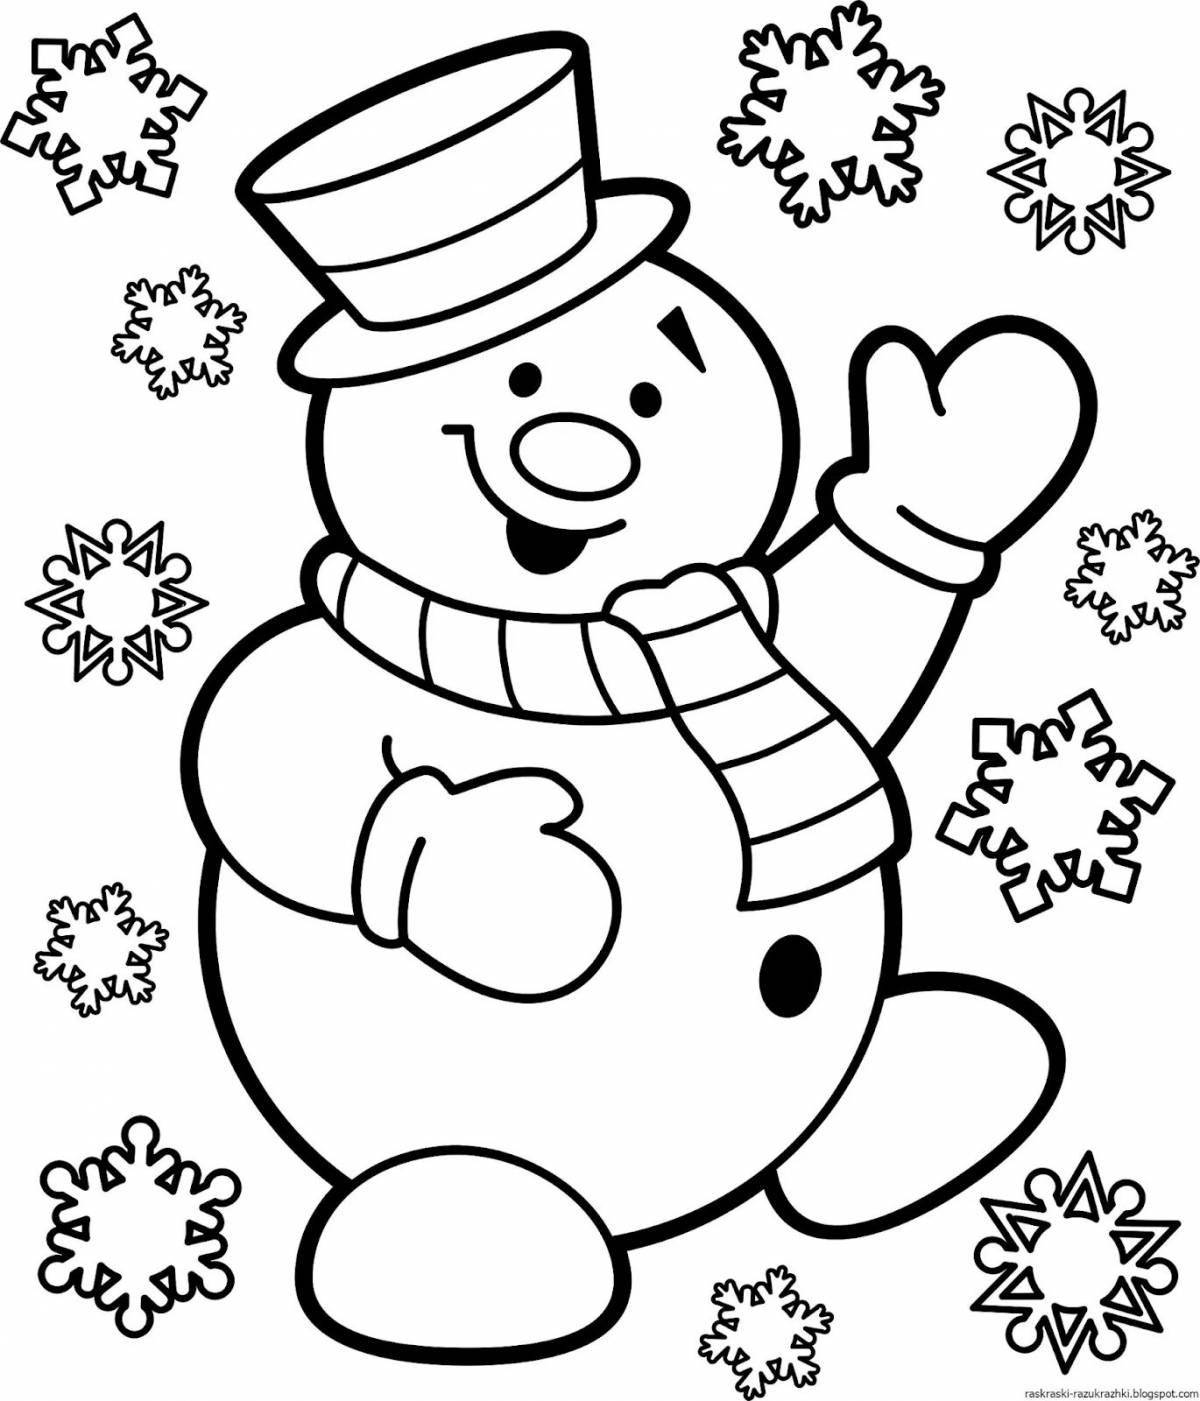 Luminous snowman coloring book for children 6-7 years old